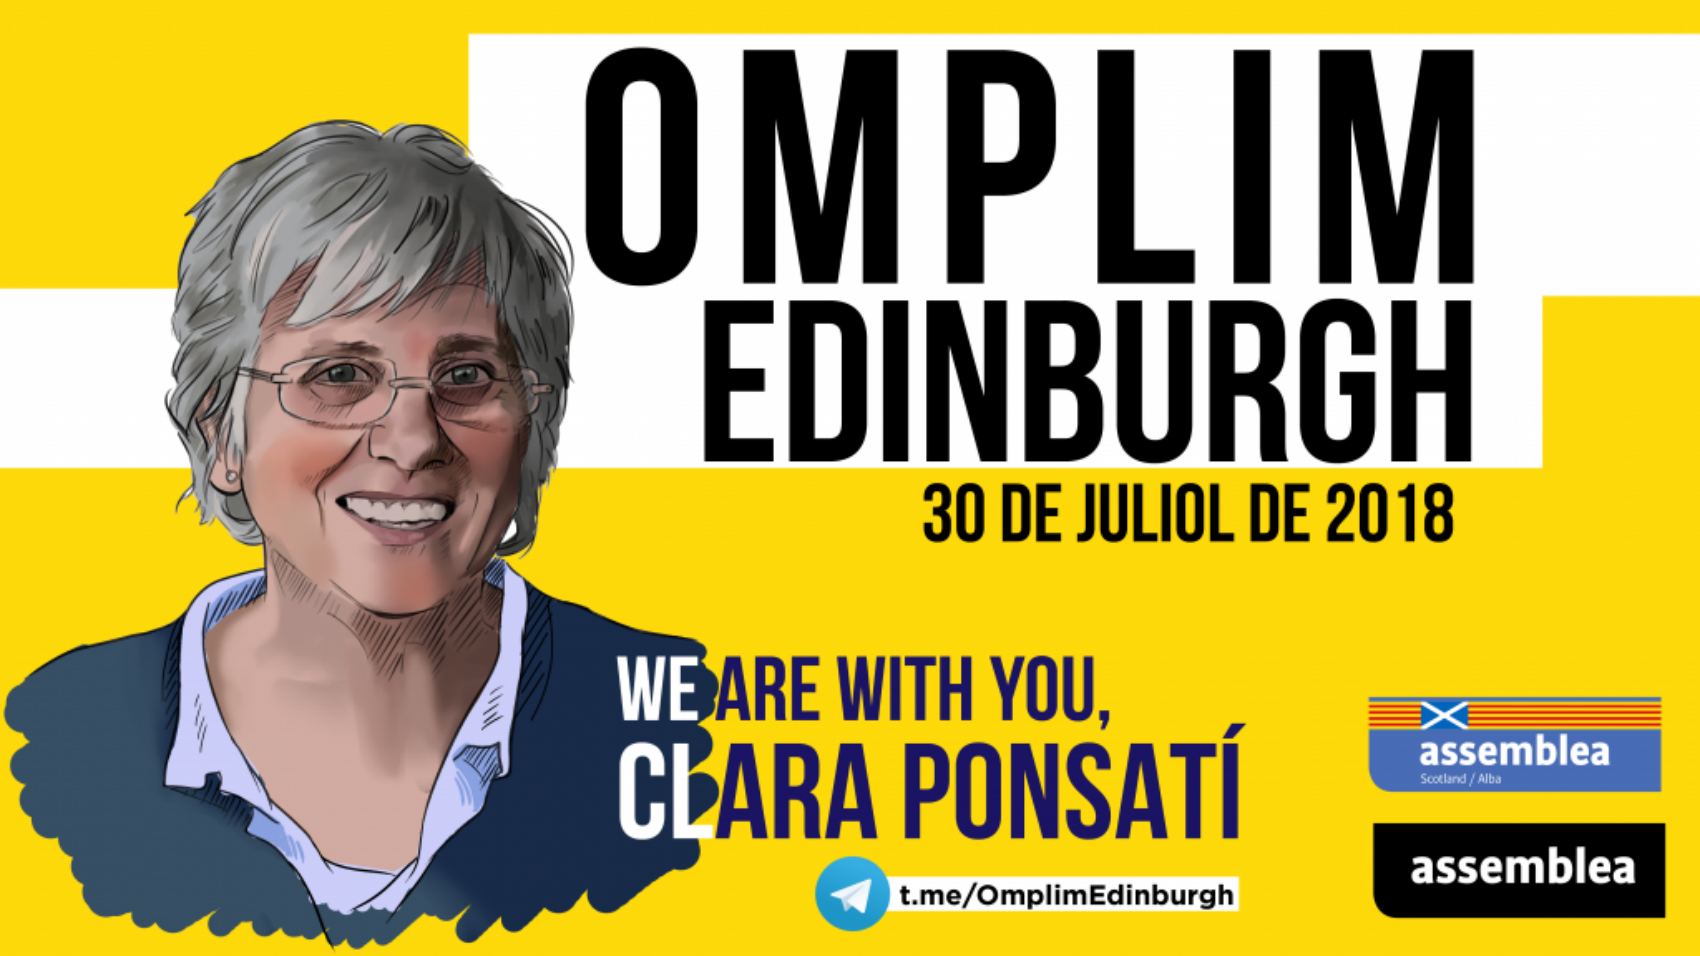 'Omplim Edinburgh': The campaign to support Ponsatí during her extradition hearing